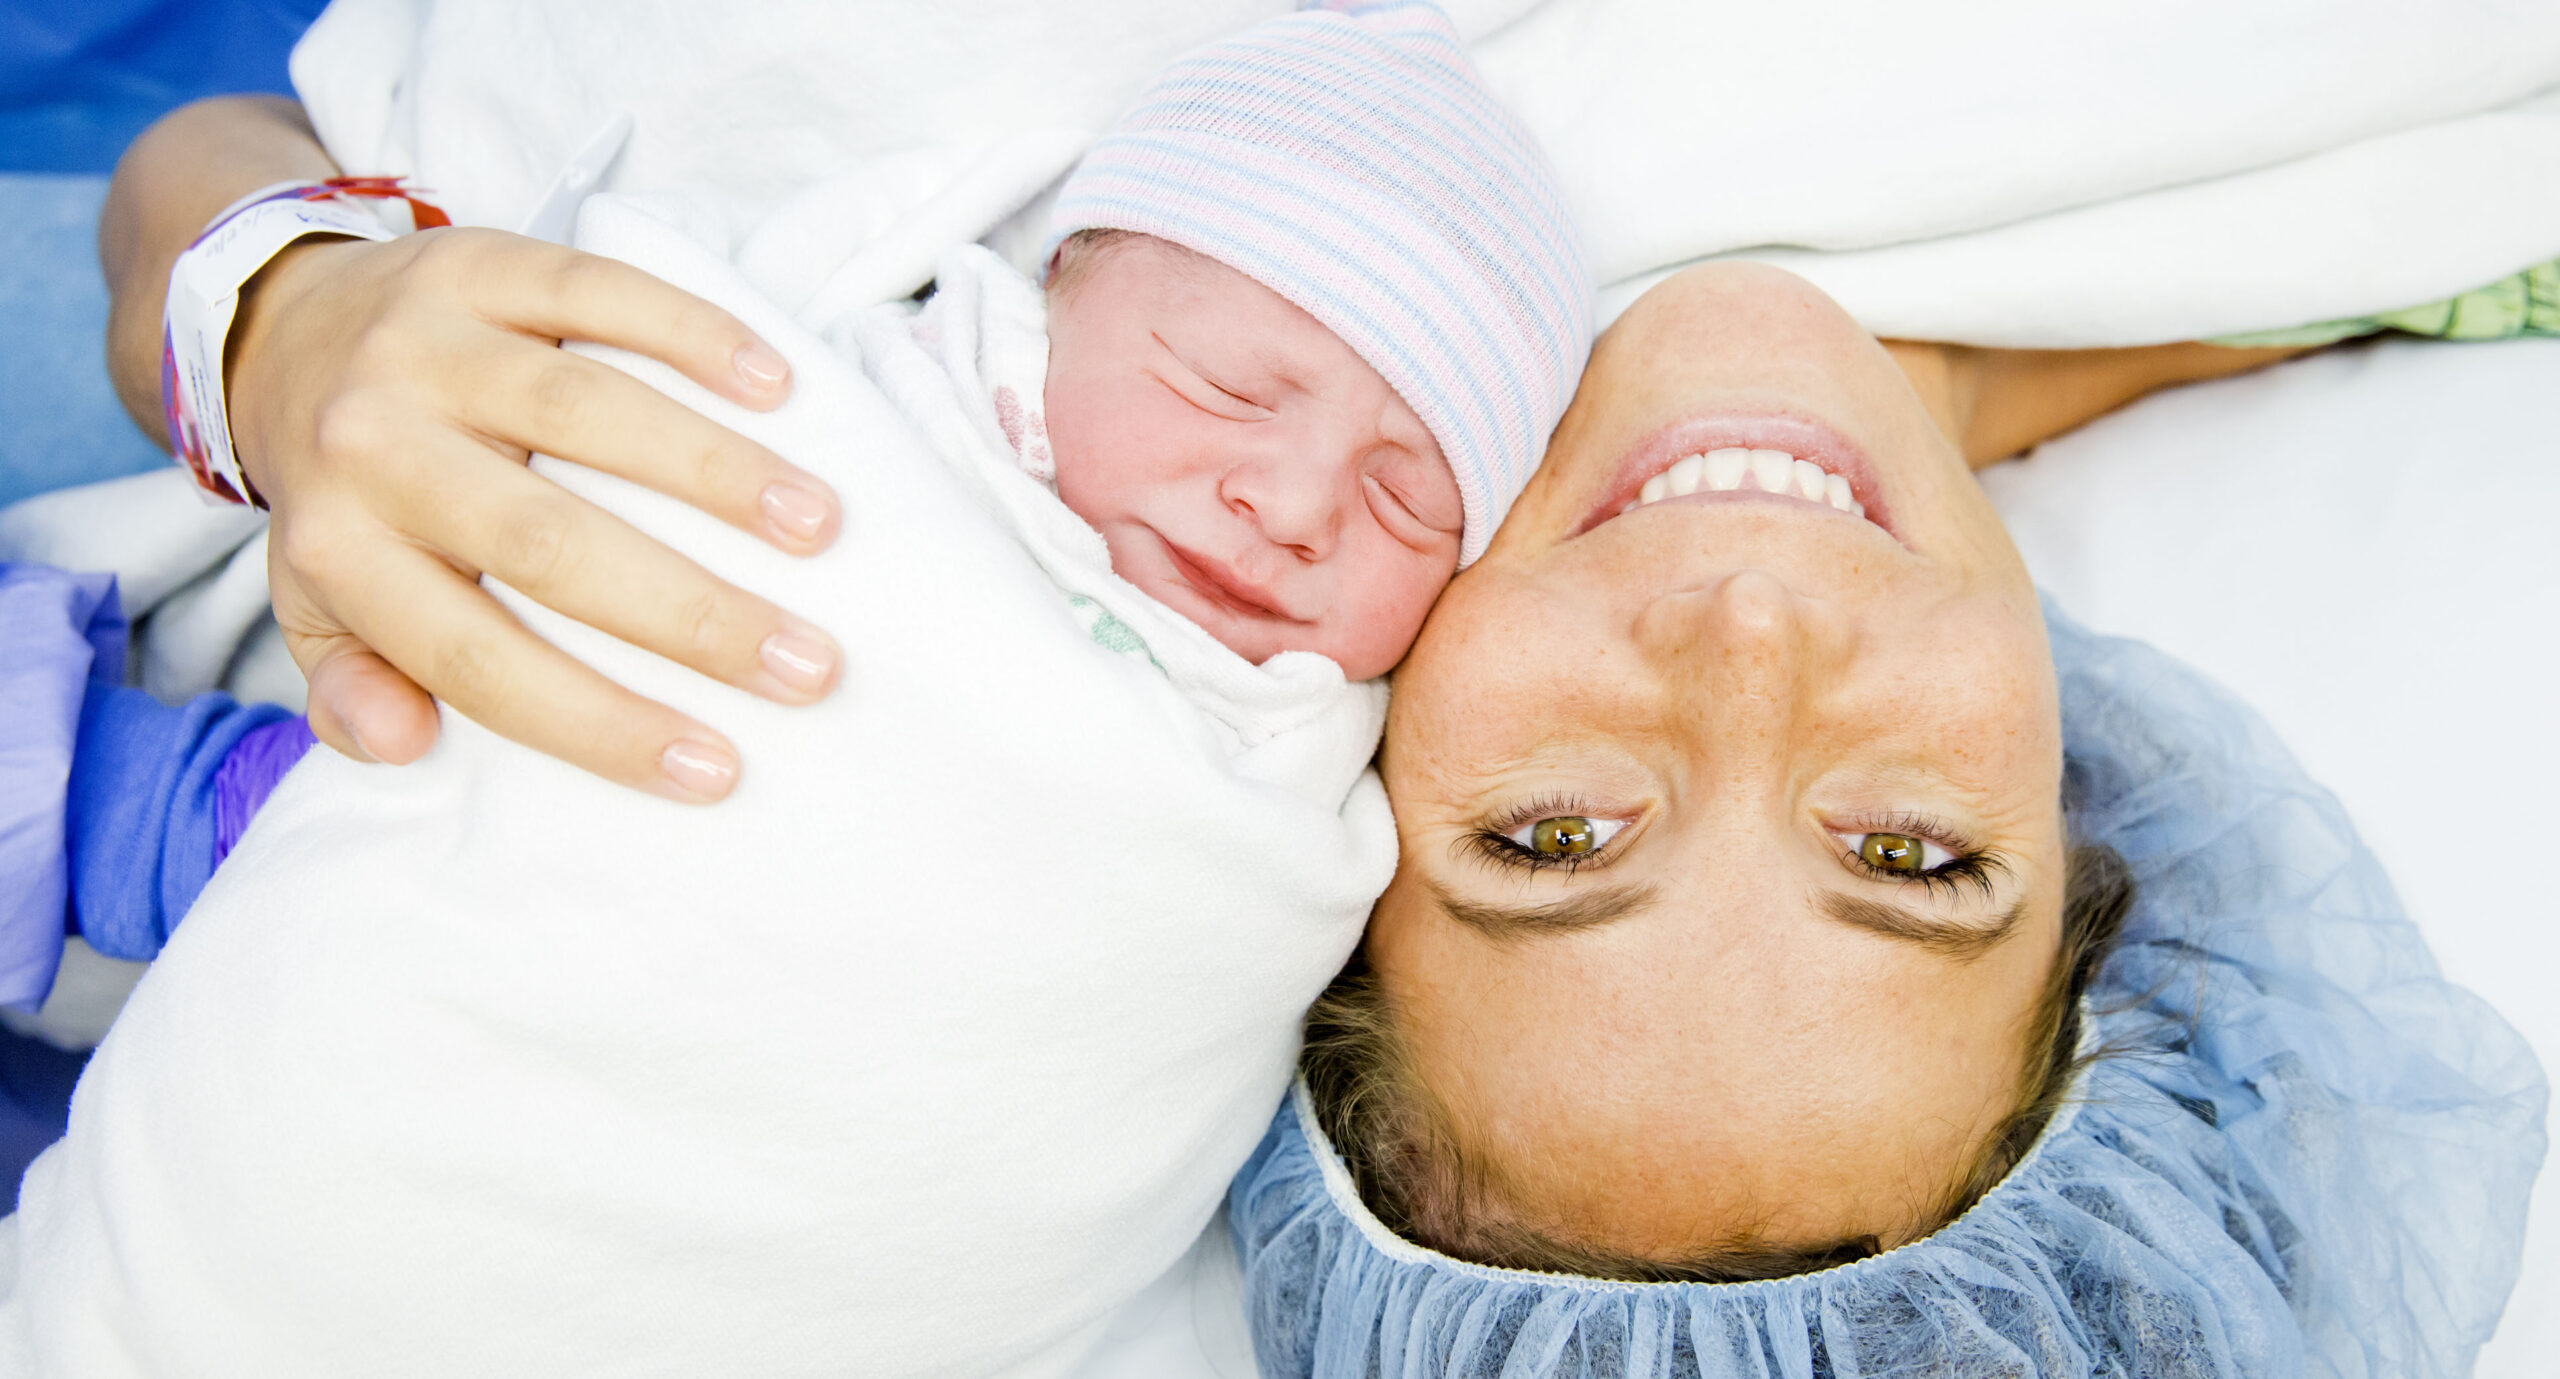 Why Women Who Have C-Sections Are at Risk for Wound Complications and How SMARTKITS™ Can Help